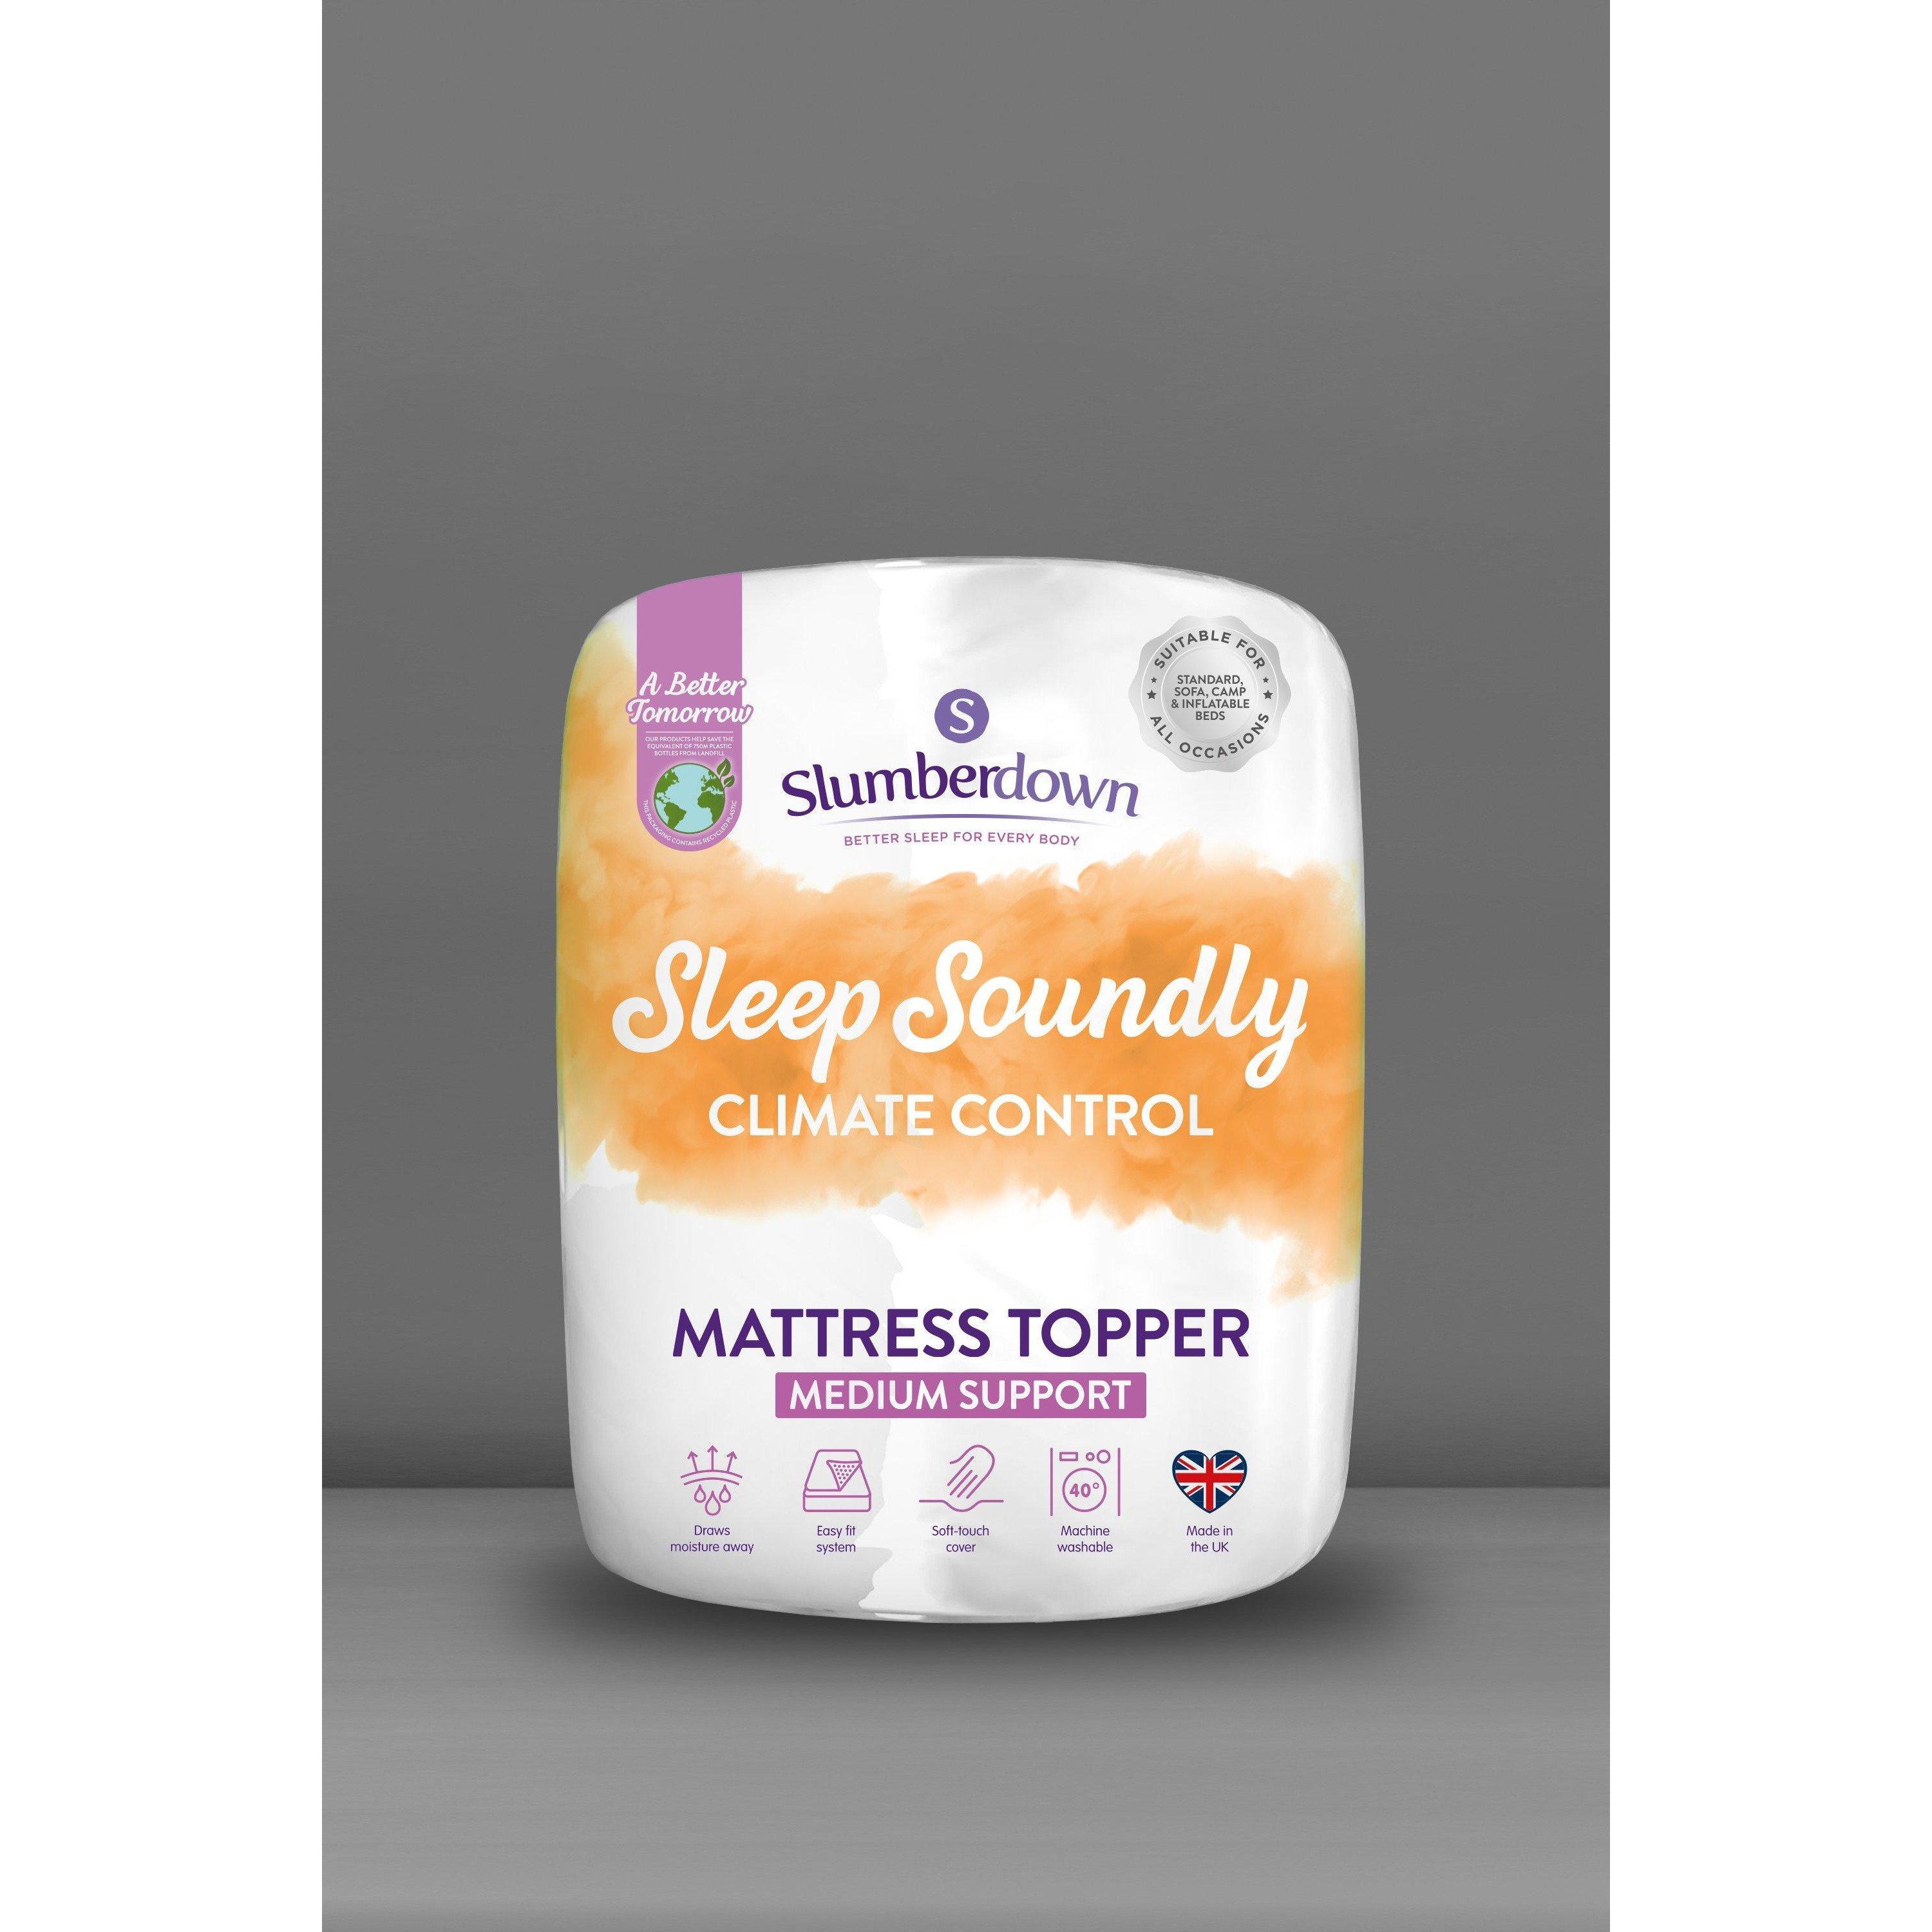 Sleep Soundly Climate Control Mattress Topper - image 1